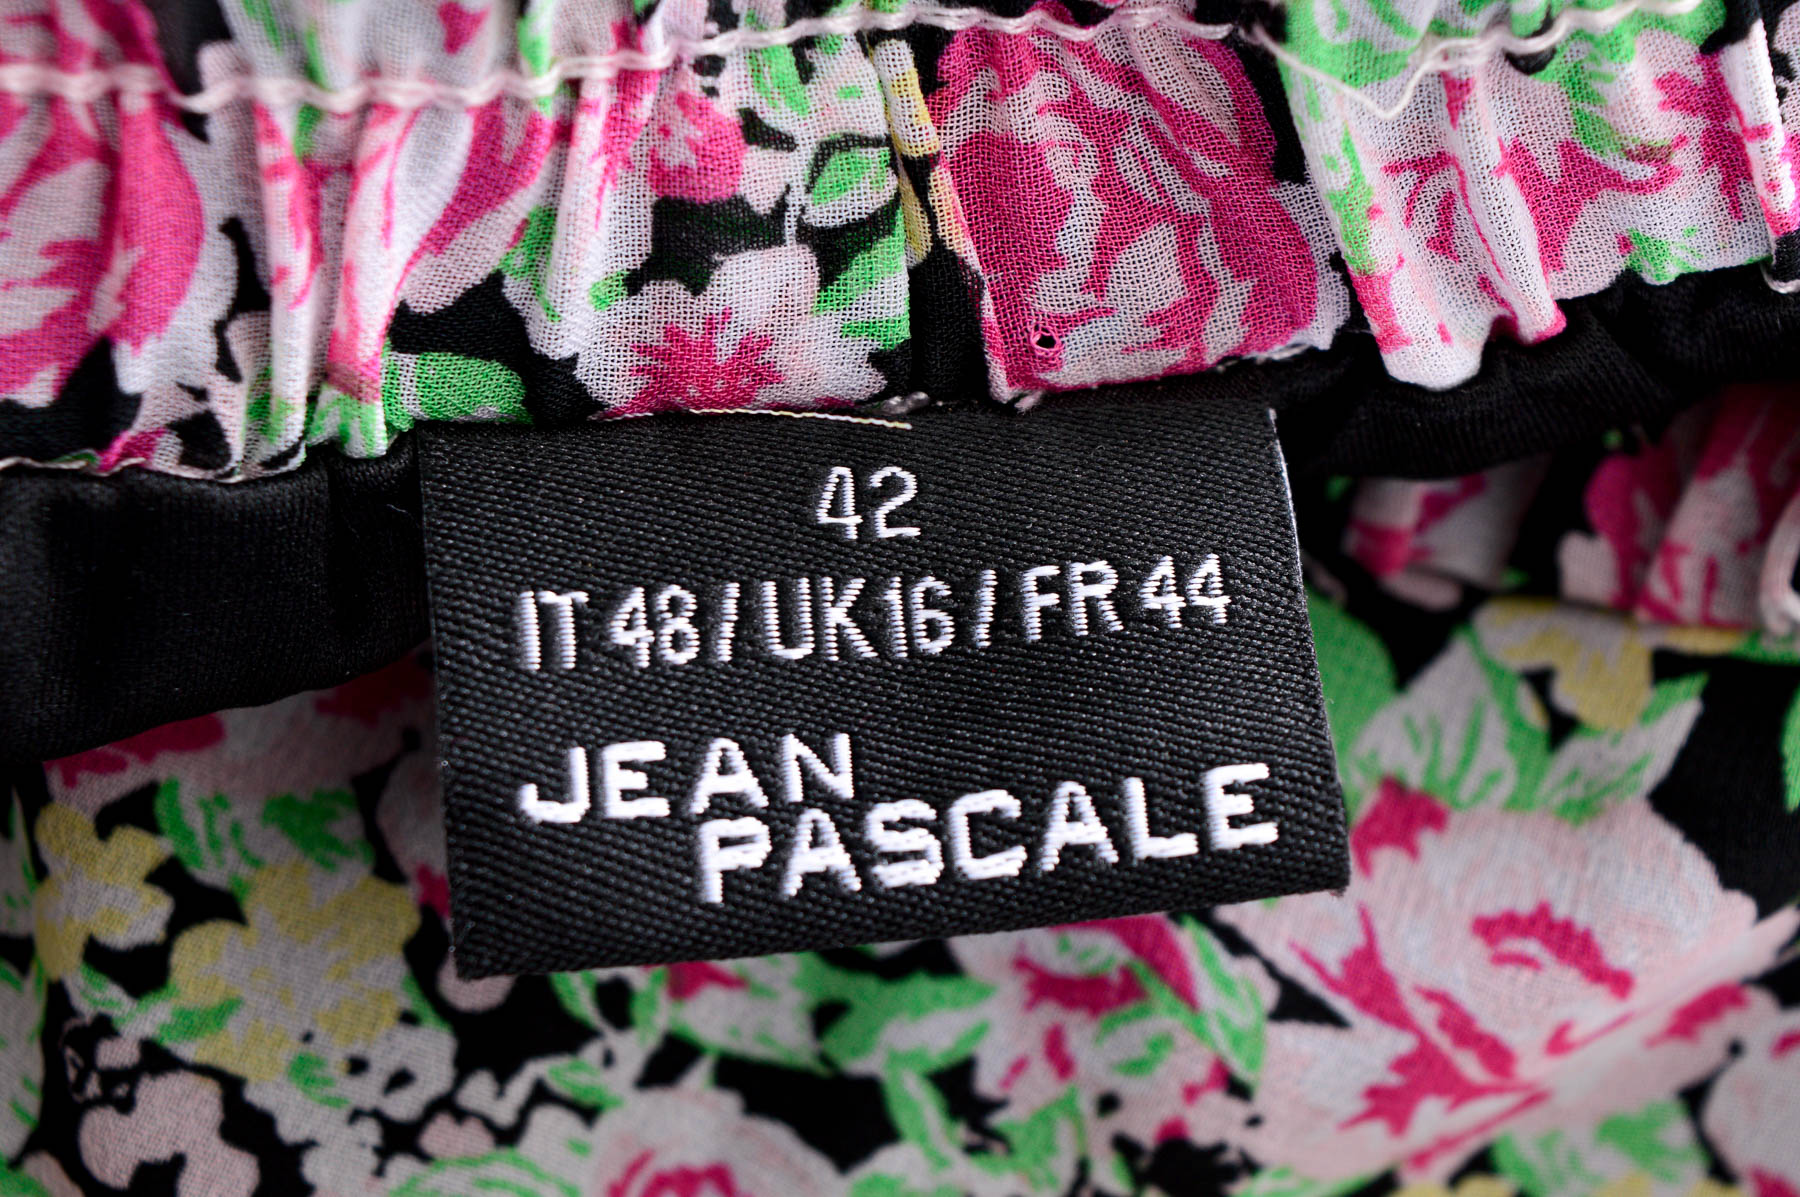 Skirt - Jean Pascale - 2